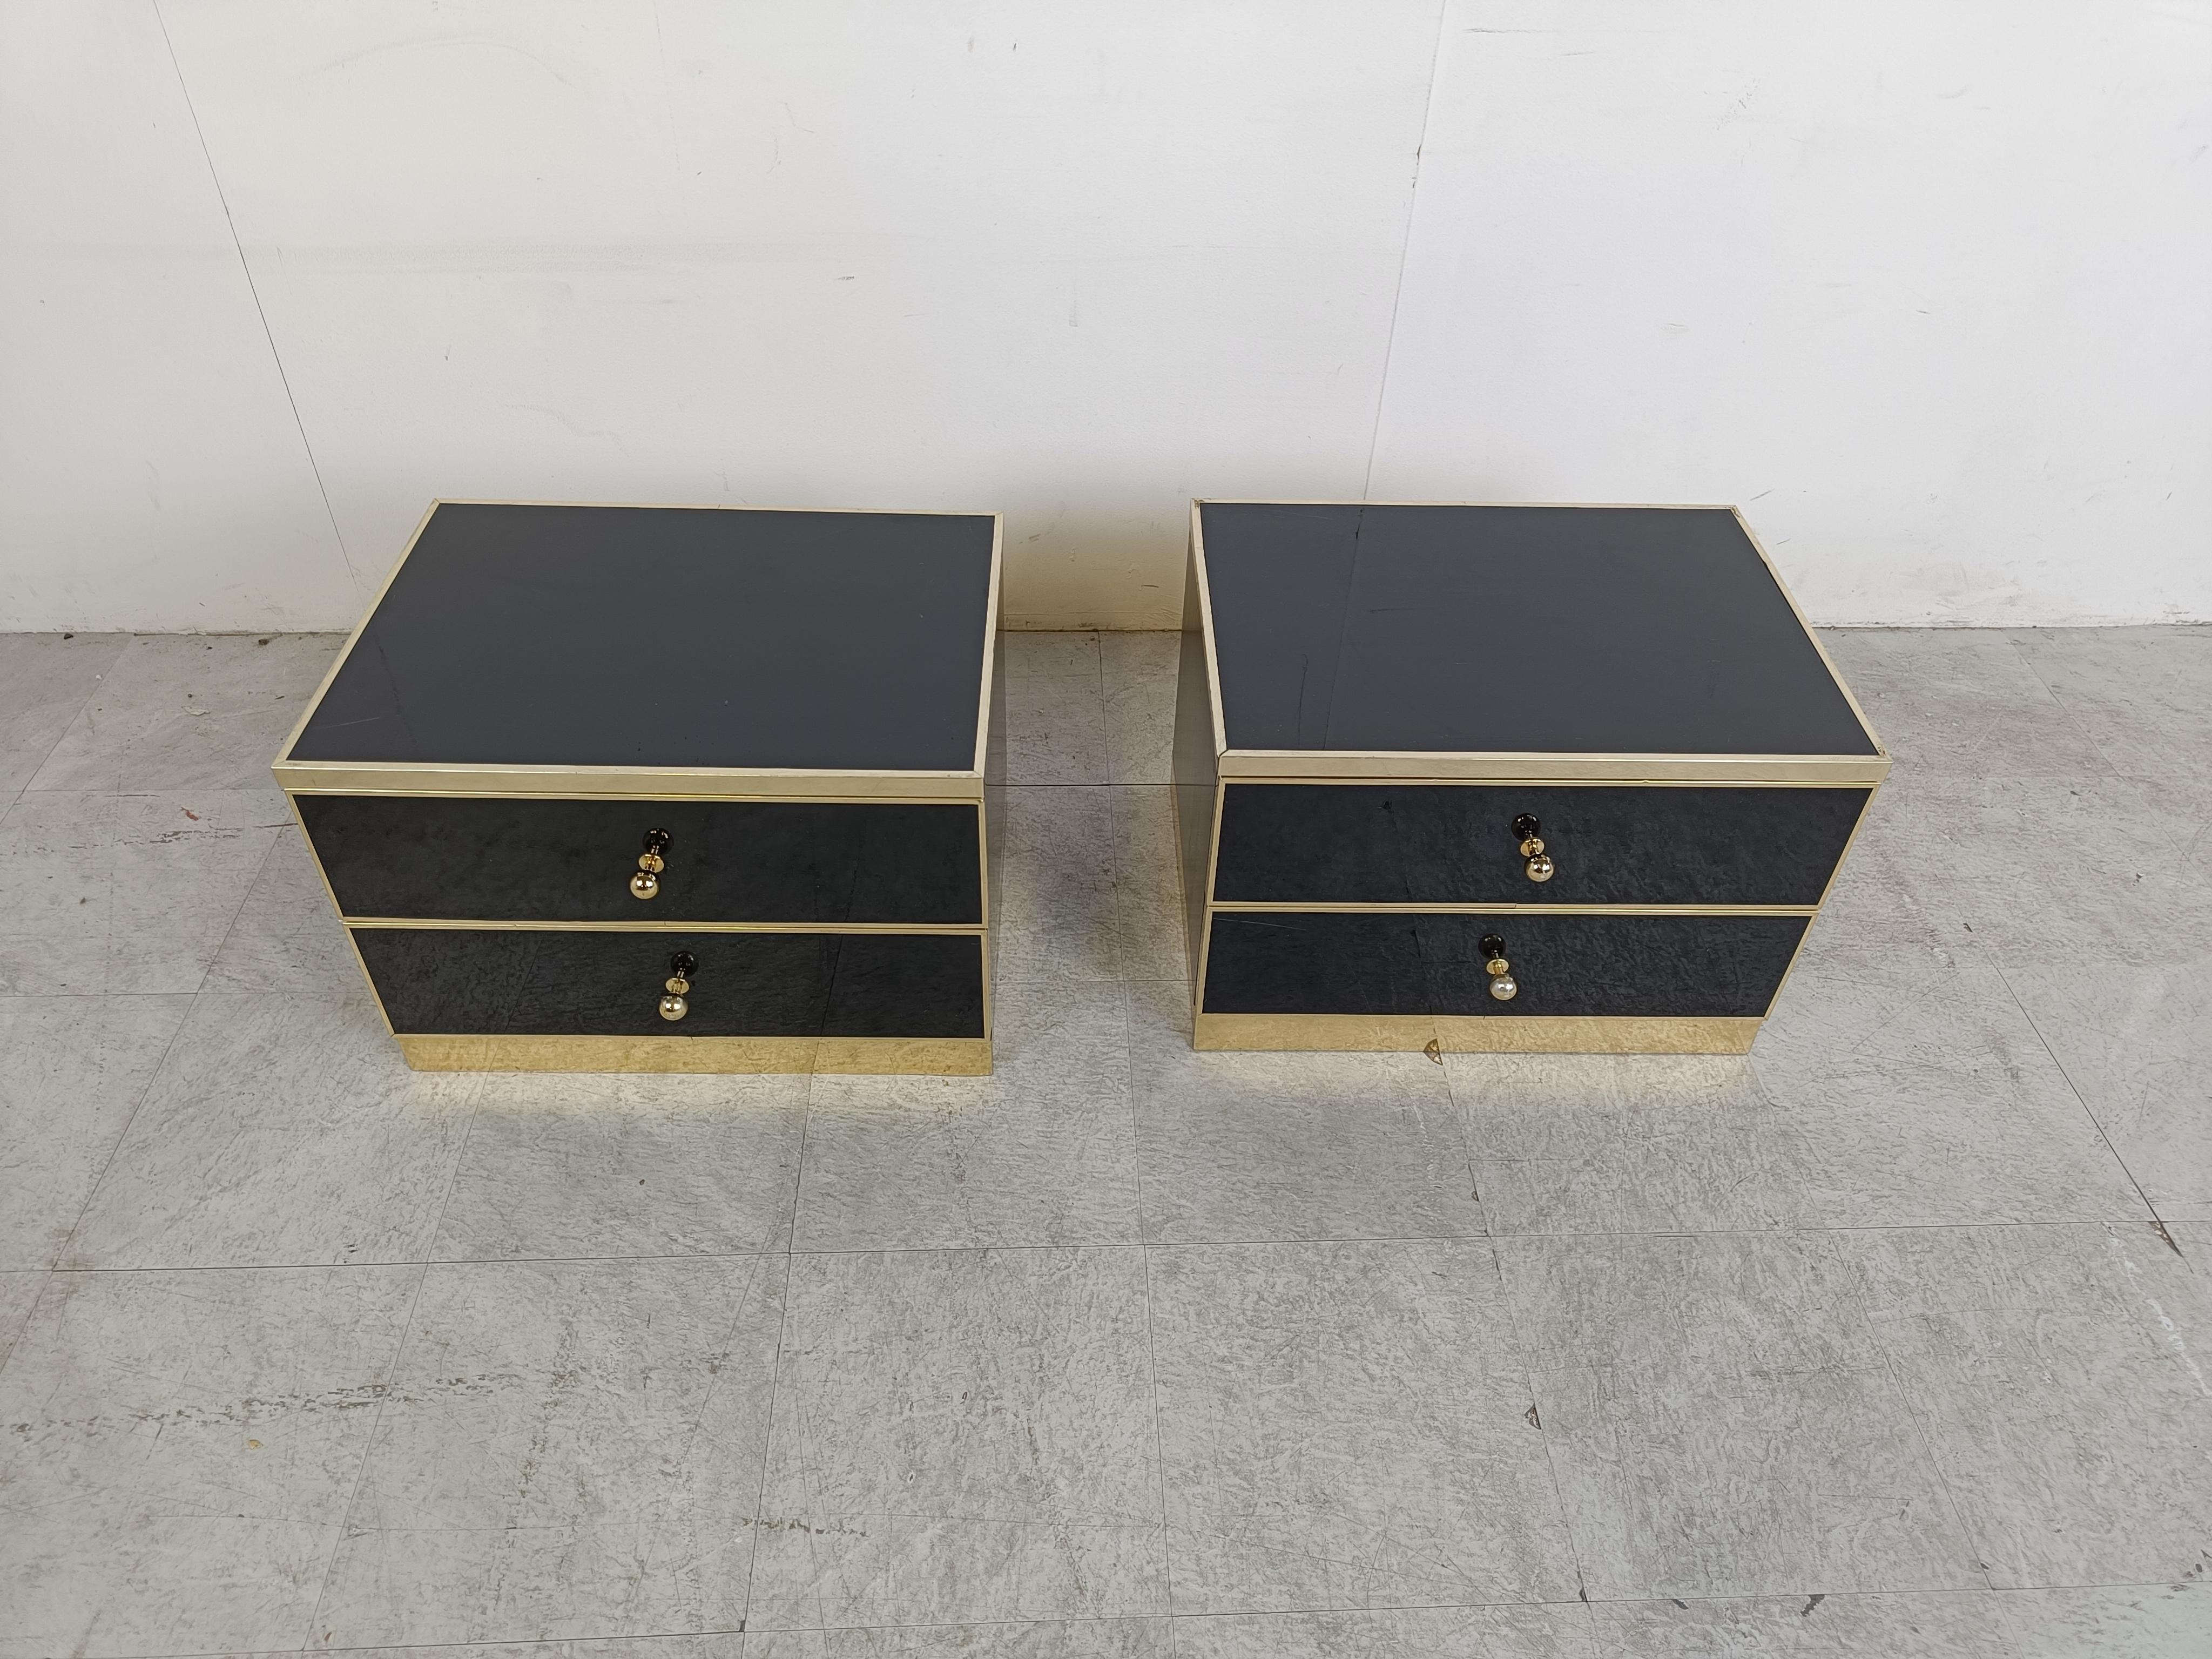 Pair of lacquered and brass bedside cabinets each with two drawers.

Very attractive 1970s pieces.

1970s - Italy

Good condition

Dimensions:
Height: 40cm/15.74